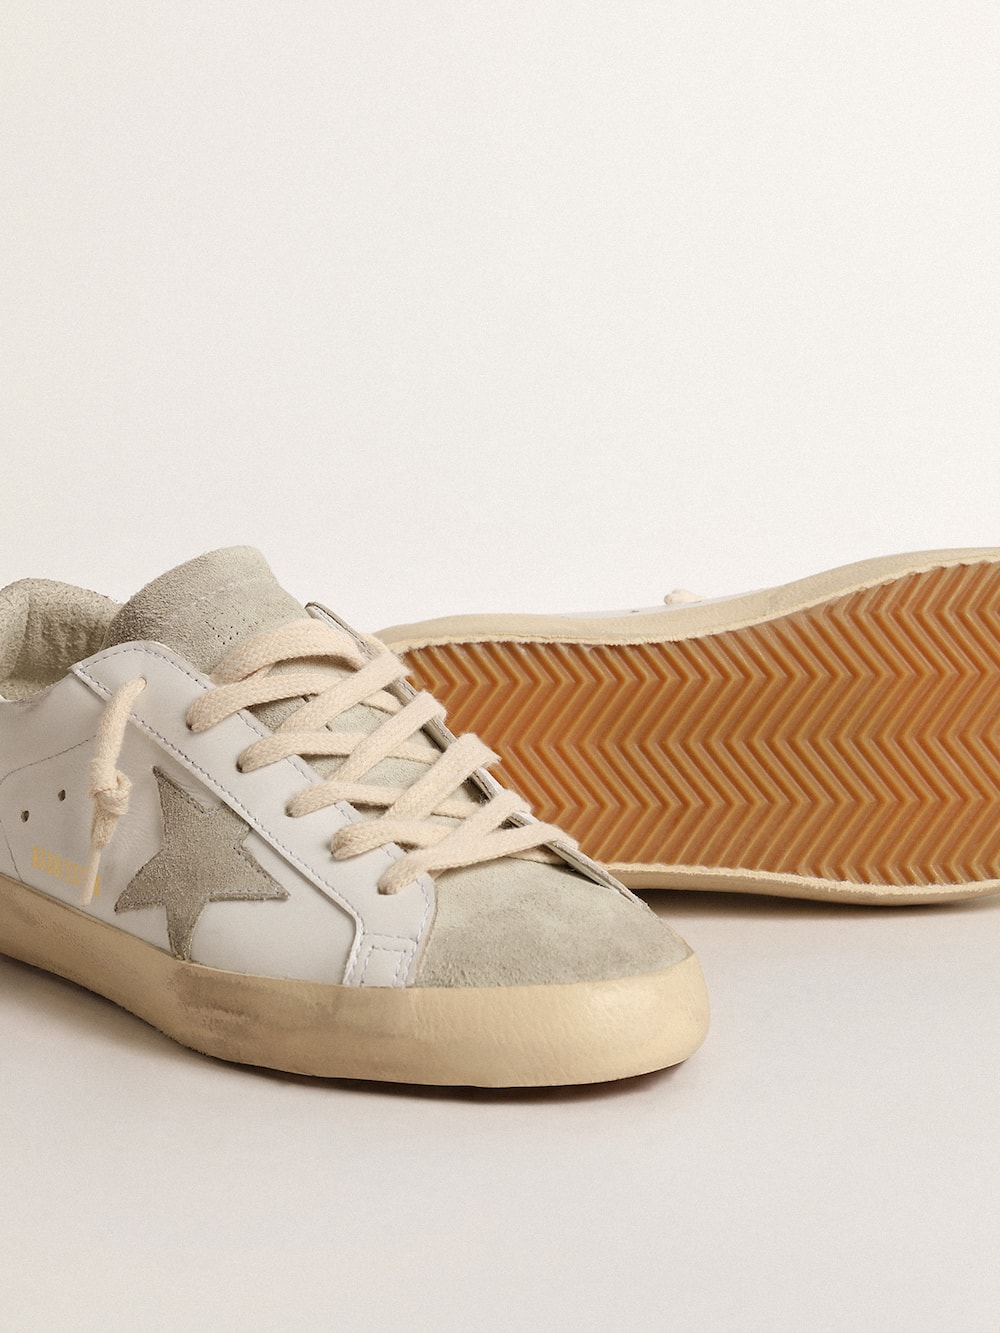 Golden Goose - Women's Super-Star with gray star and silver glitter heel tab in 